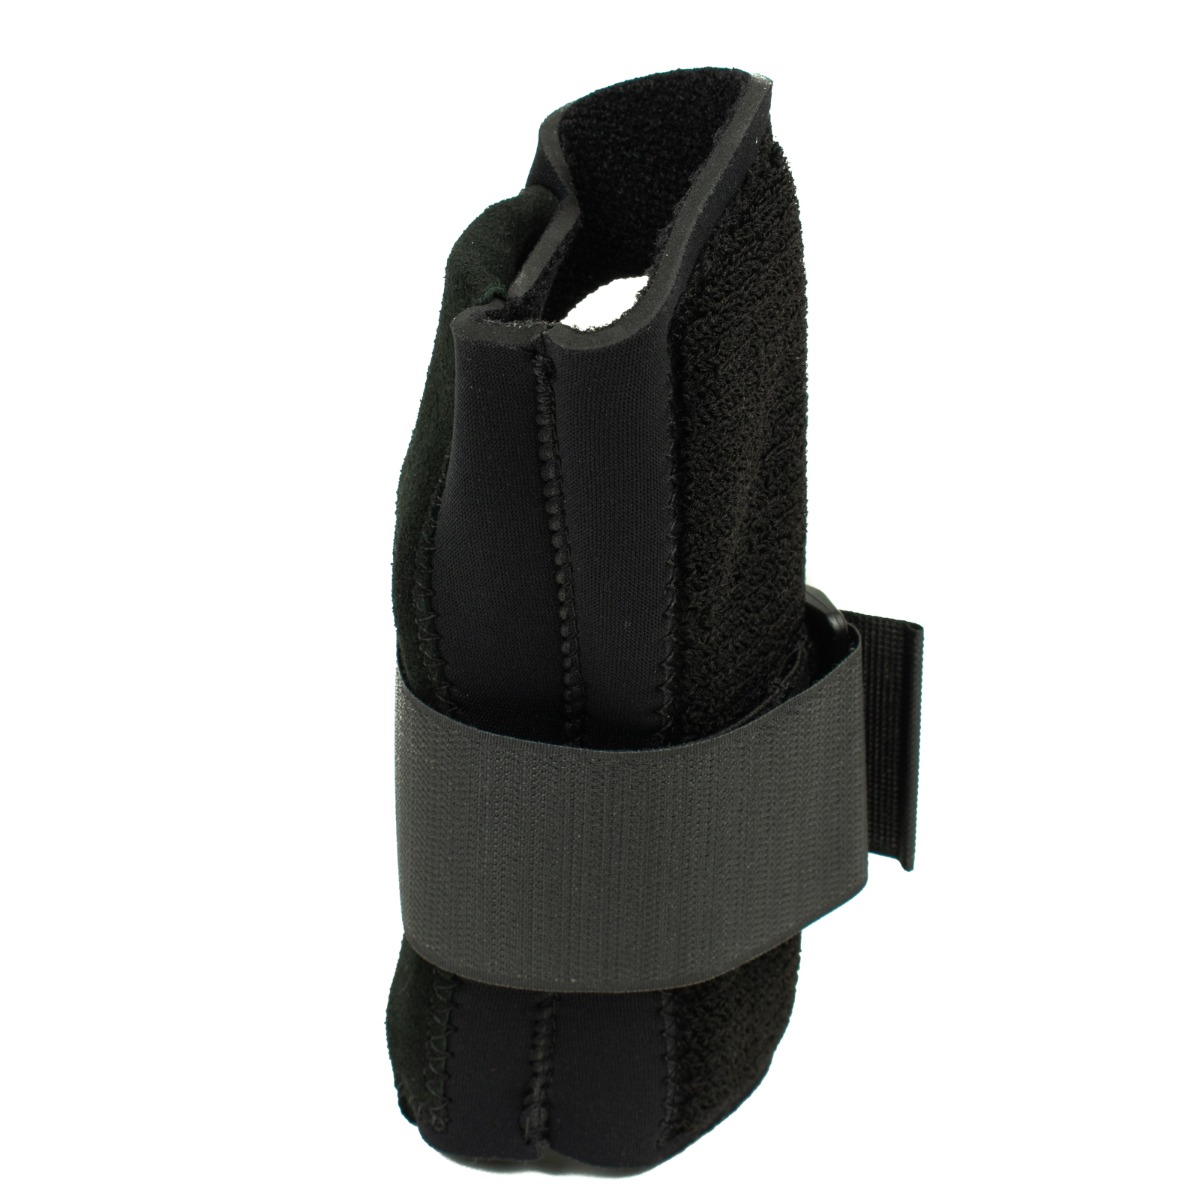 Benik Wrist Support with Straps and Stays